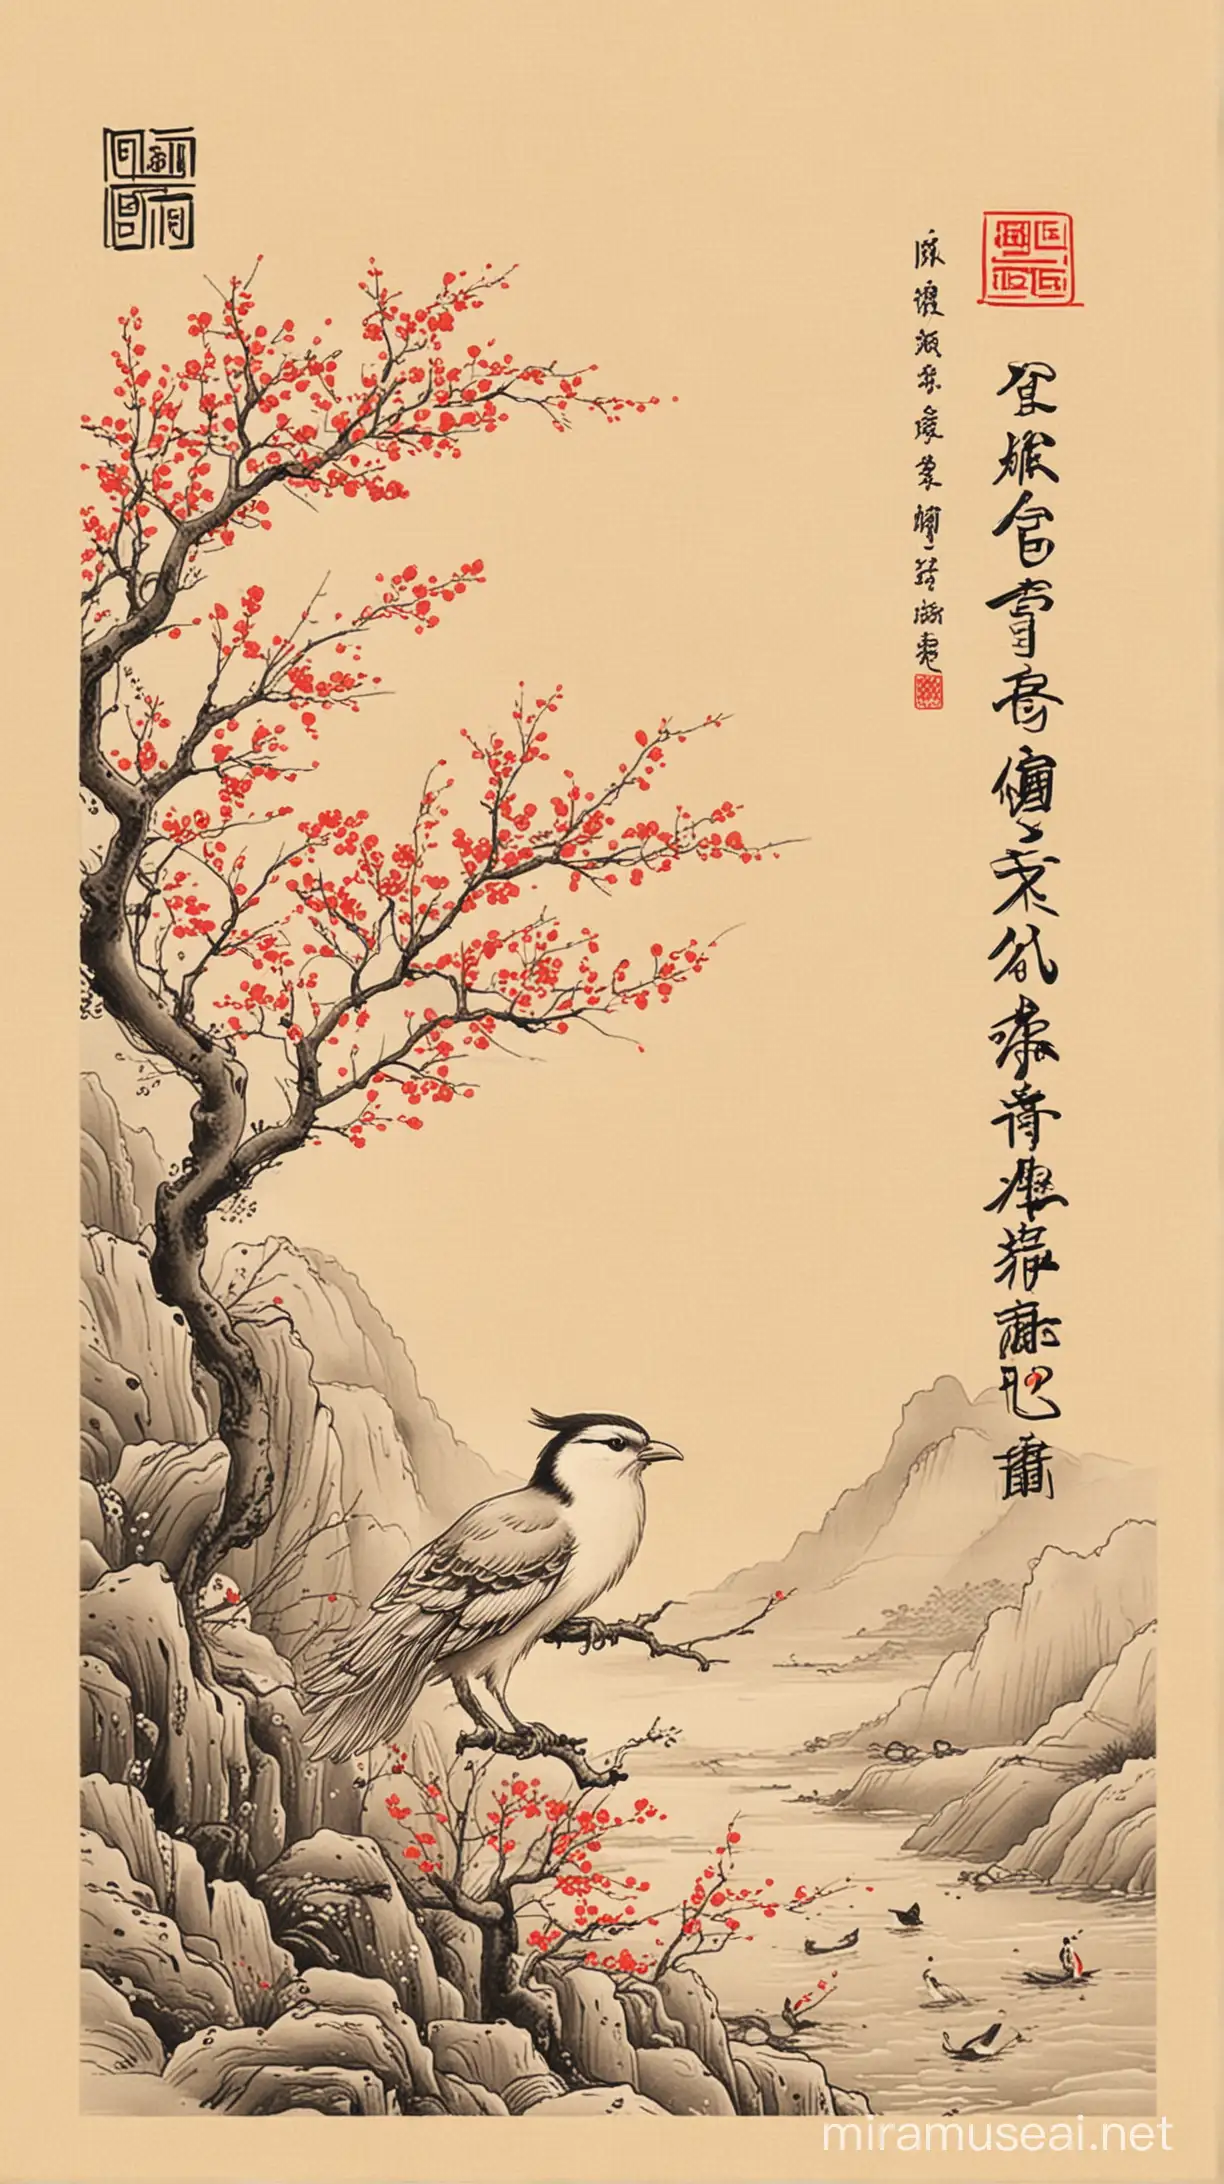 Chinese Poetry Textbook Cover for Primary Students Featuring a Poet in Serene Light Colors